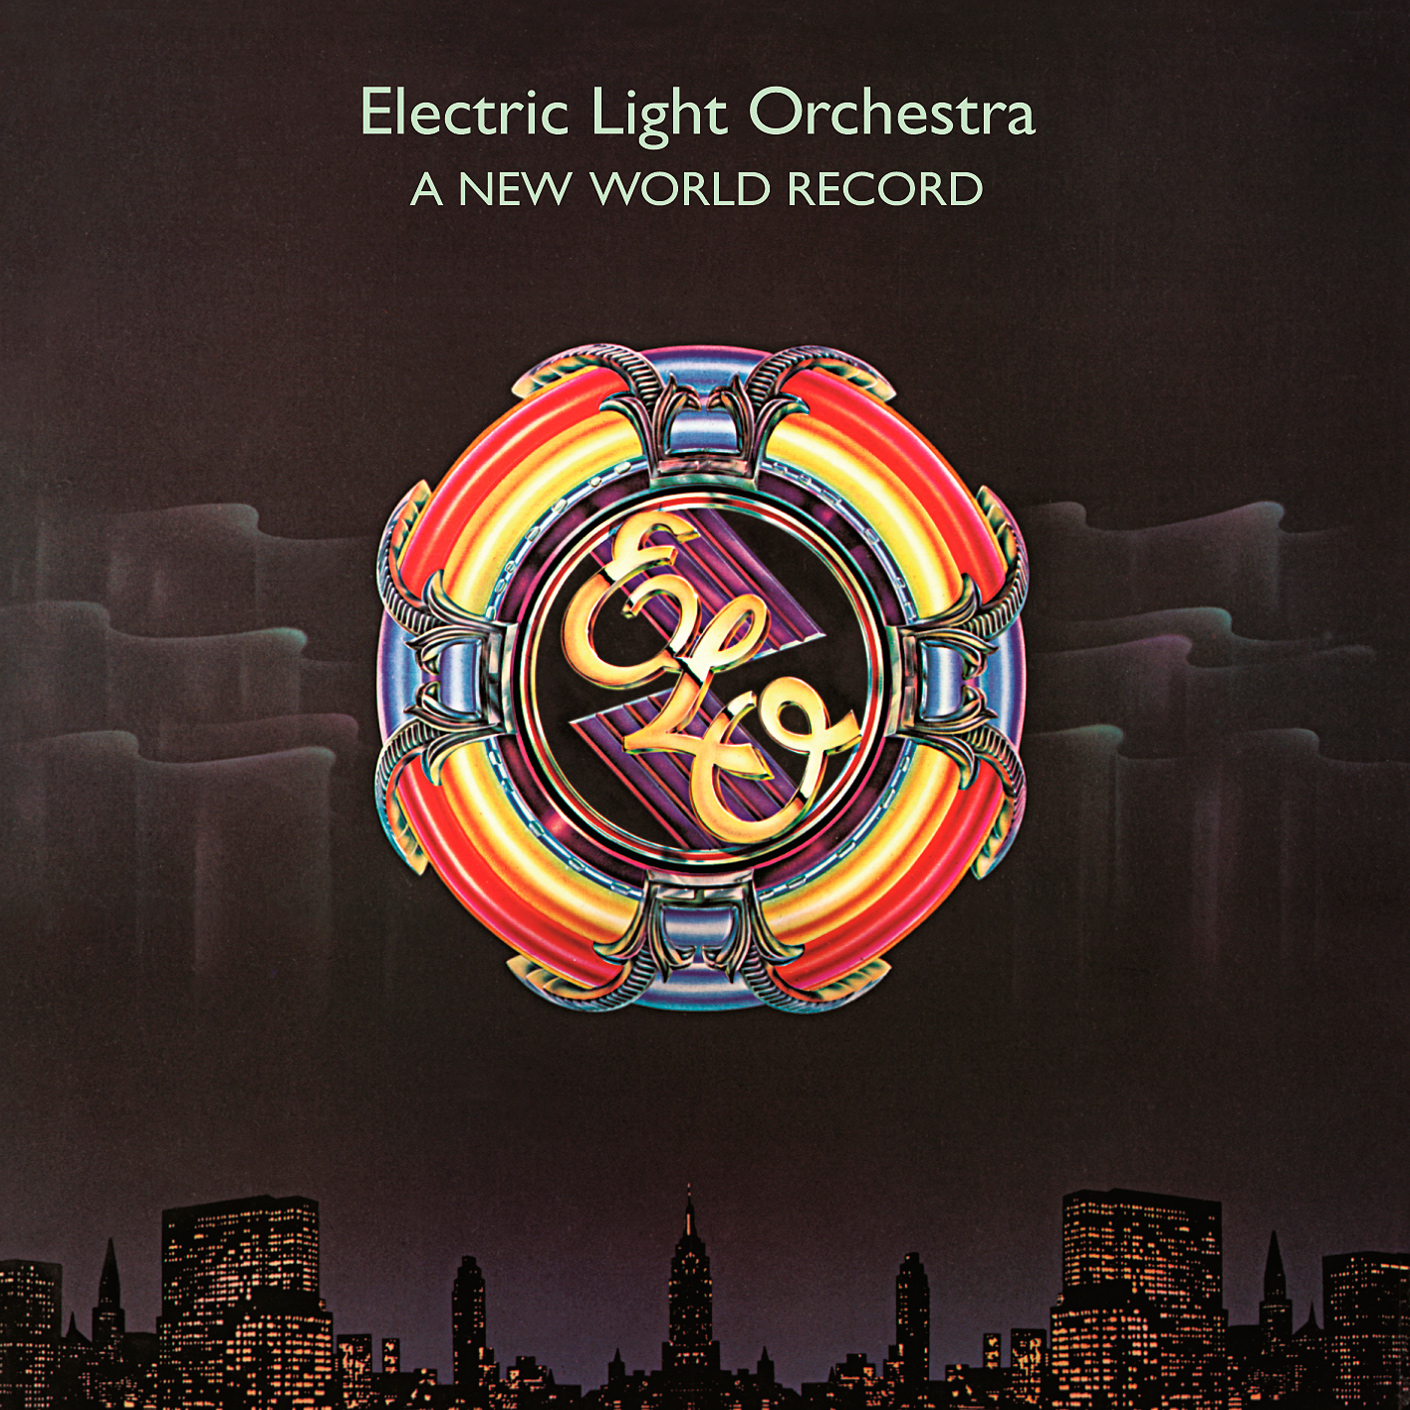 Electric Light Orchestra - A New World Record (1976/2015) [HDTracks FLAC 24bit/192kHz]